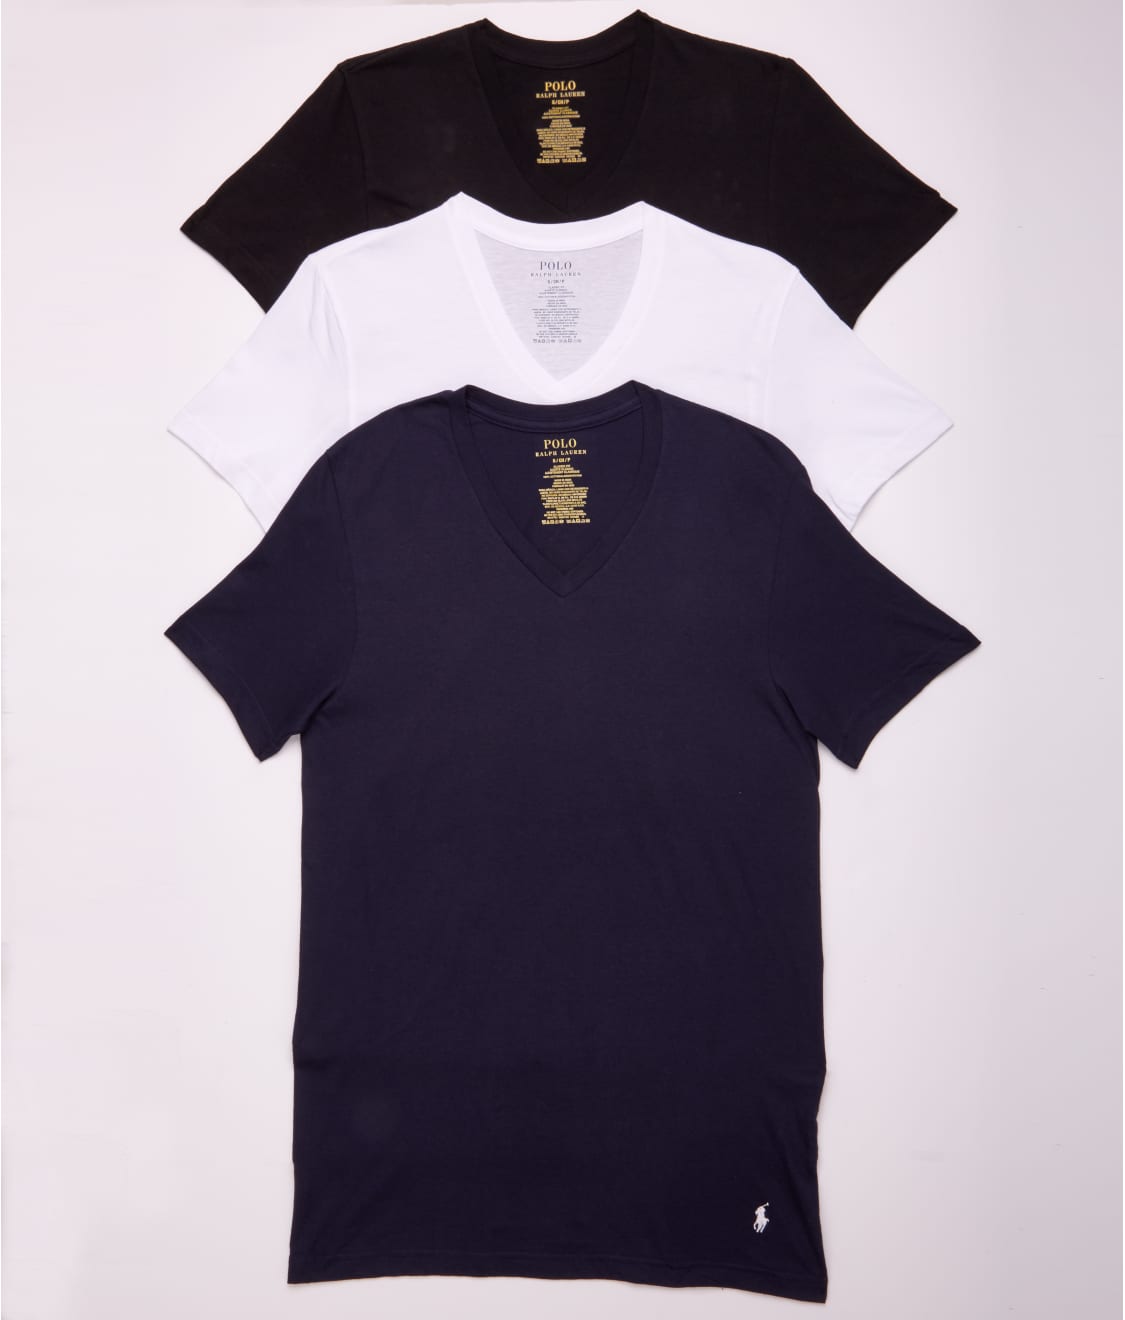 Polo Ralph Lauren: Classic Fit Cotton Wicking V-Neck T-Shirt 3-Pack NCVNP3